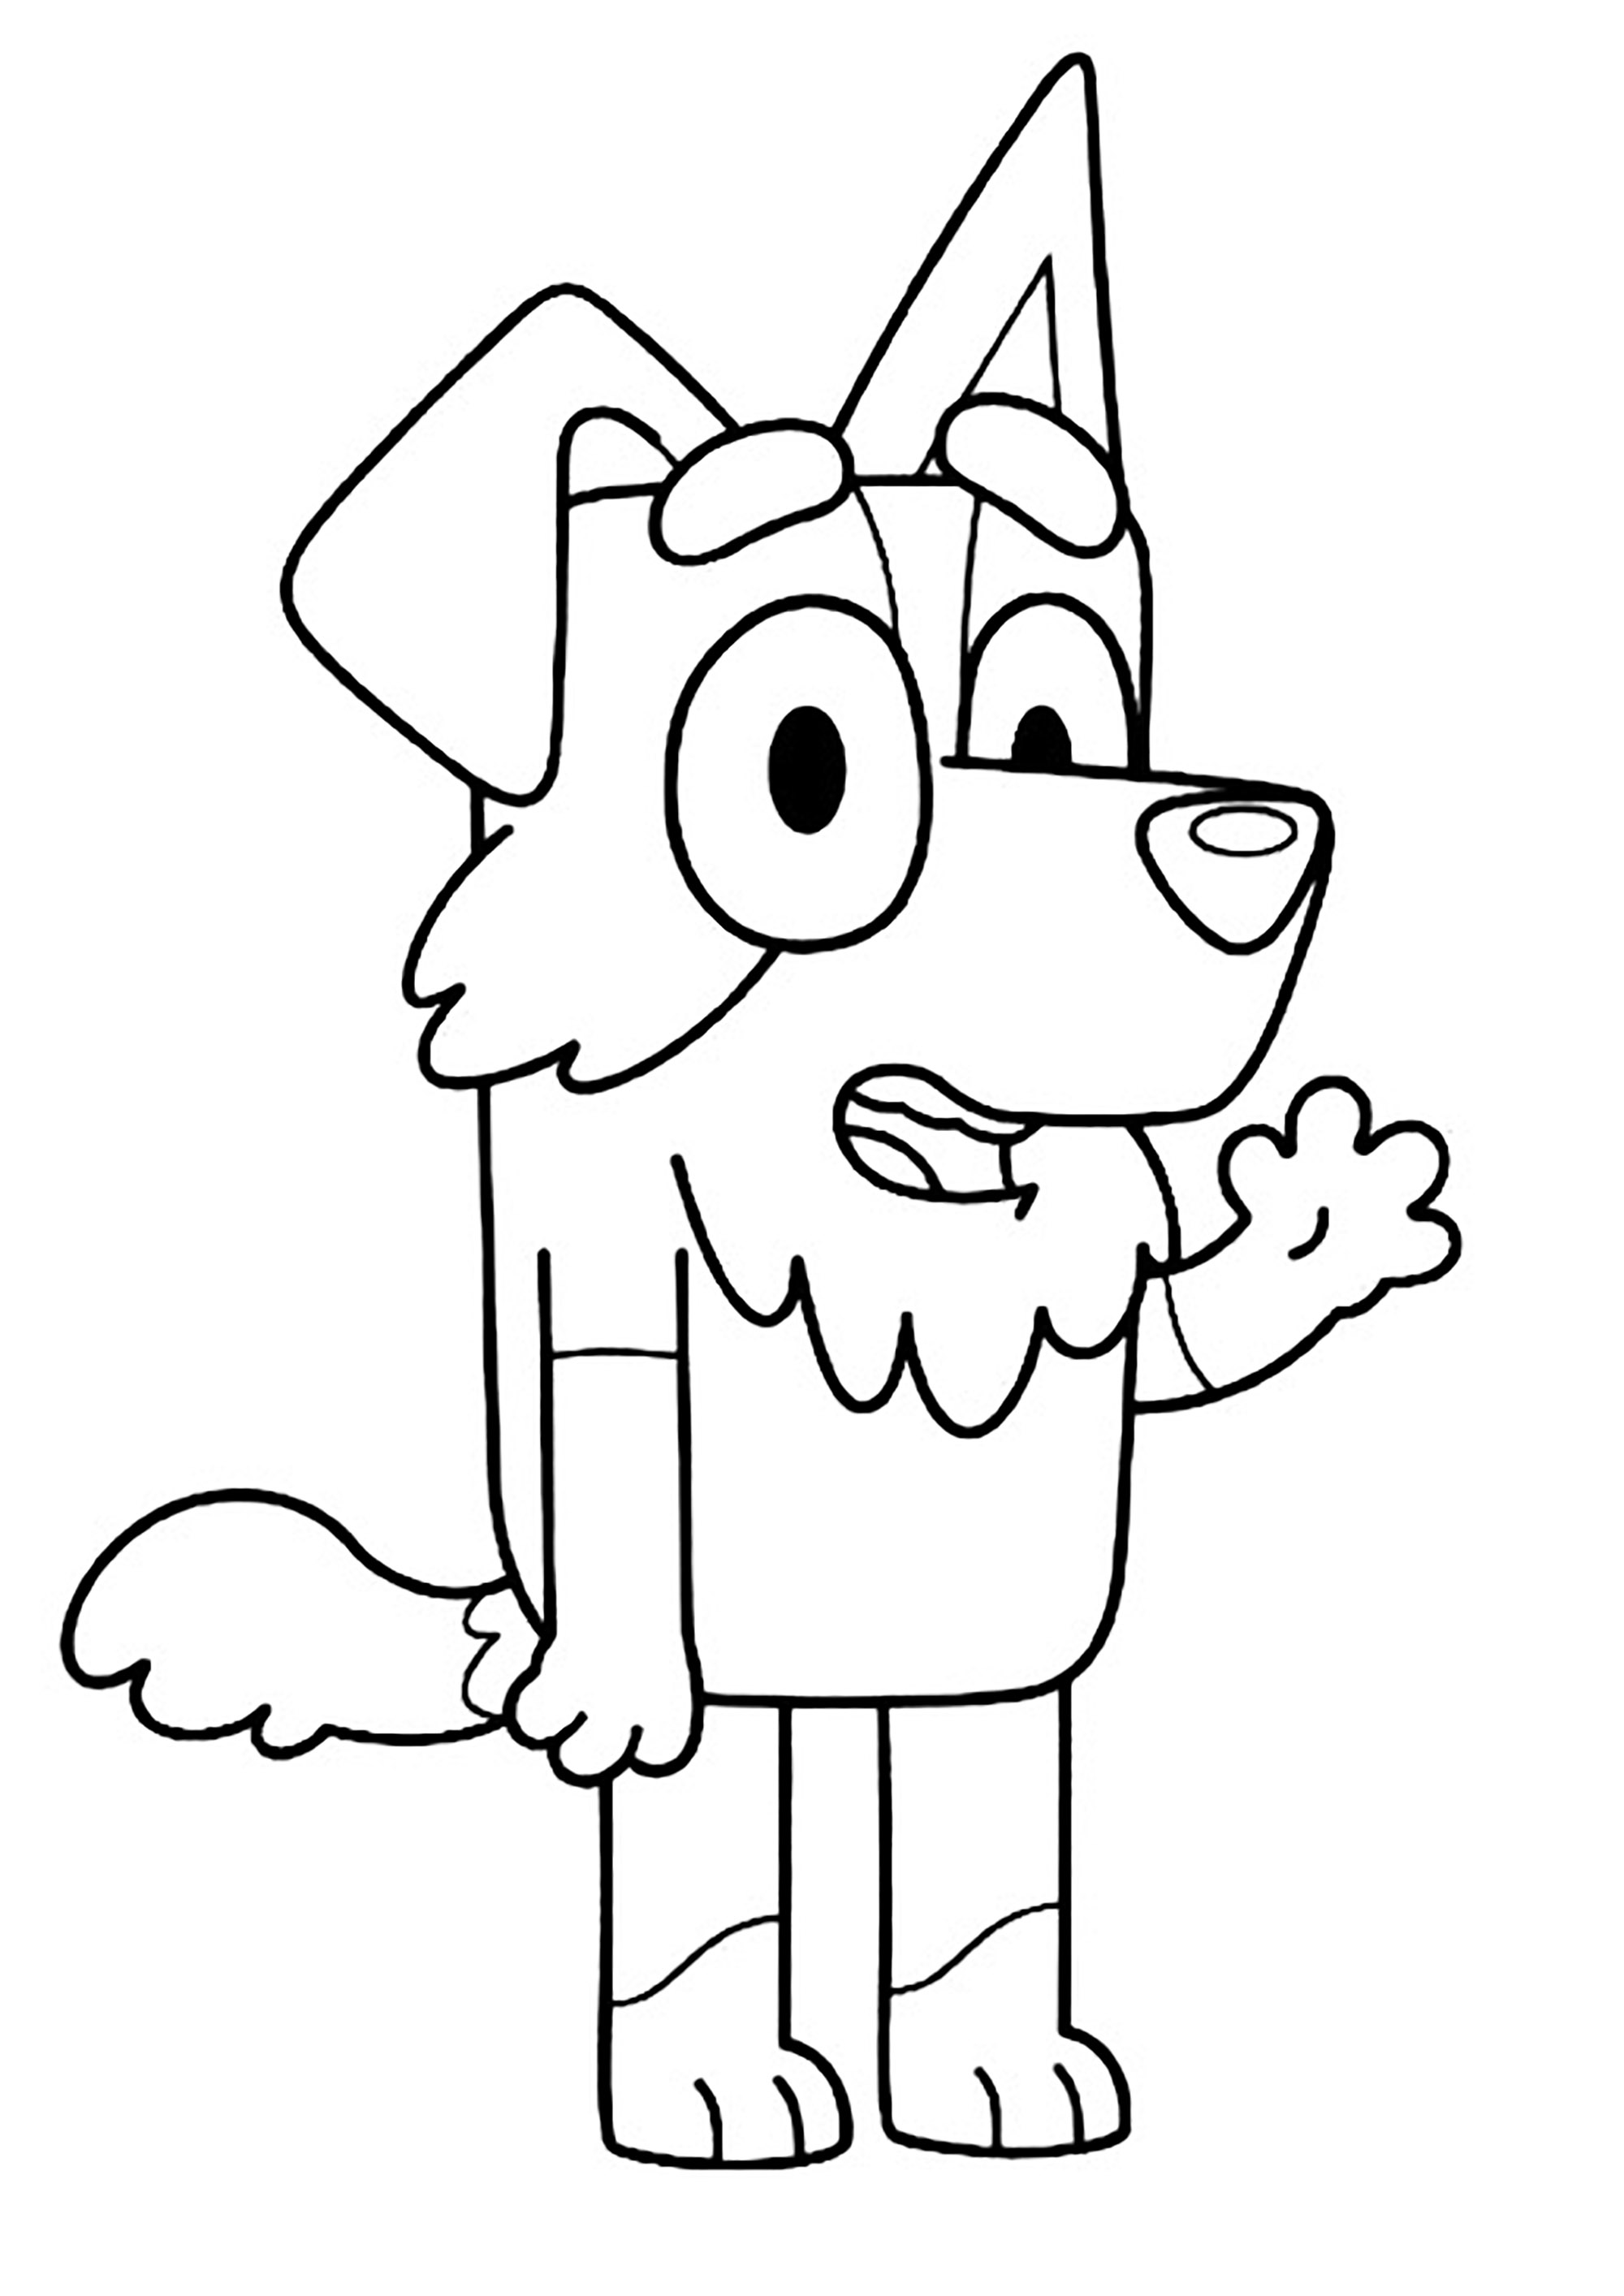 Simple coloring page of Bluey: Mackenzie